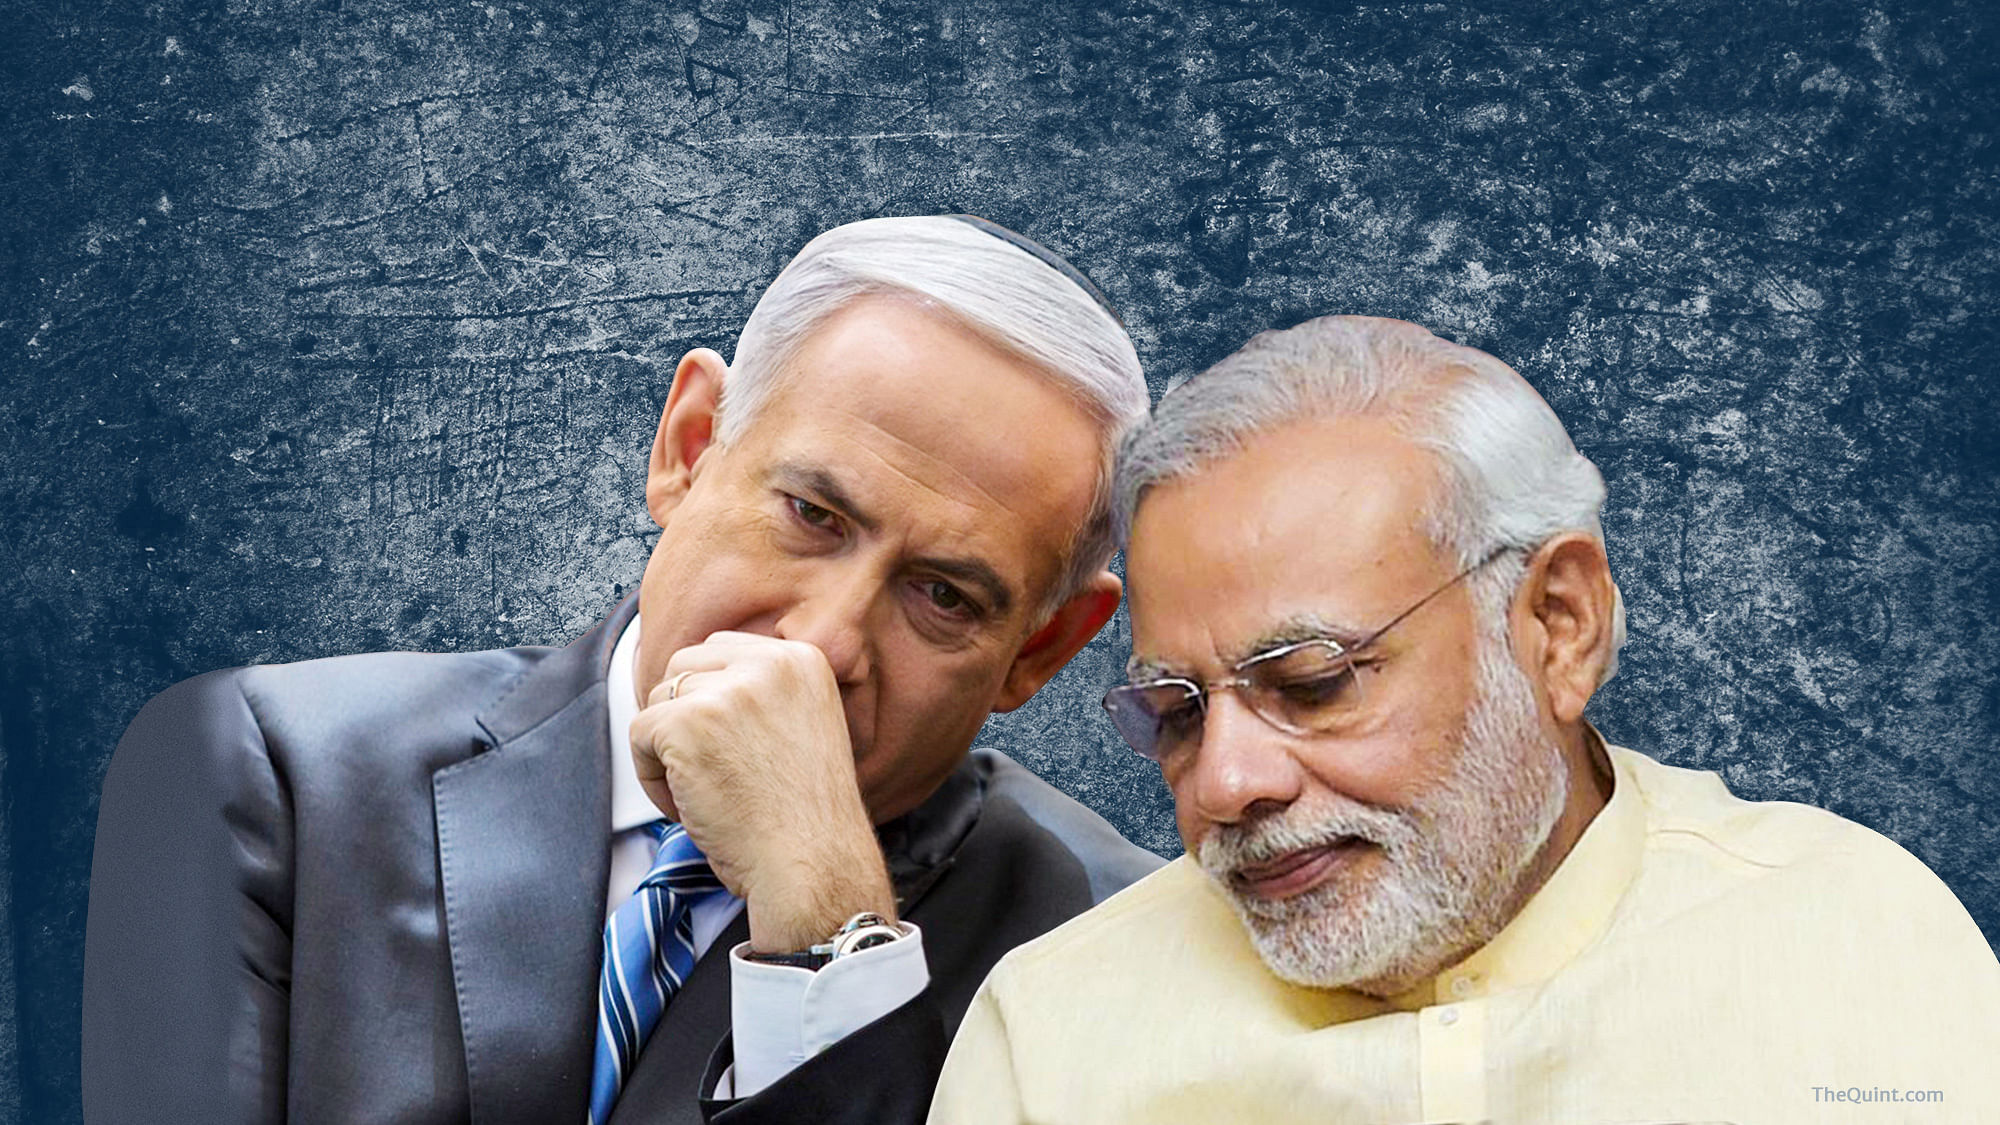 

PM Modi’s visit to Israel would be high on agenda with both countries looking forward to strong strategic ties.